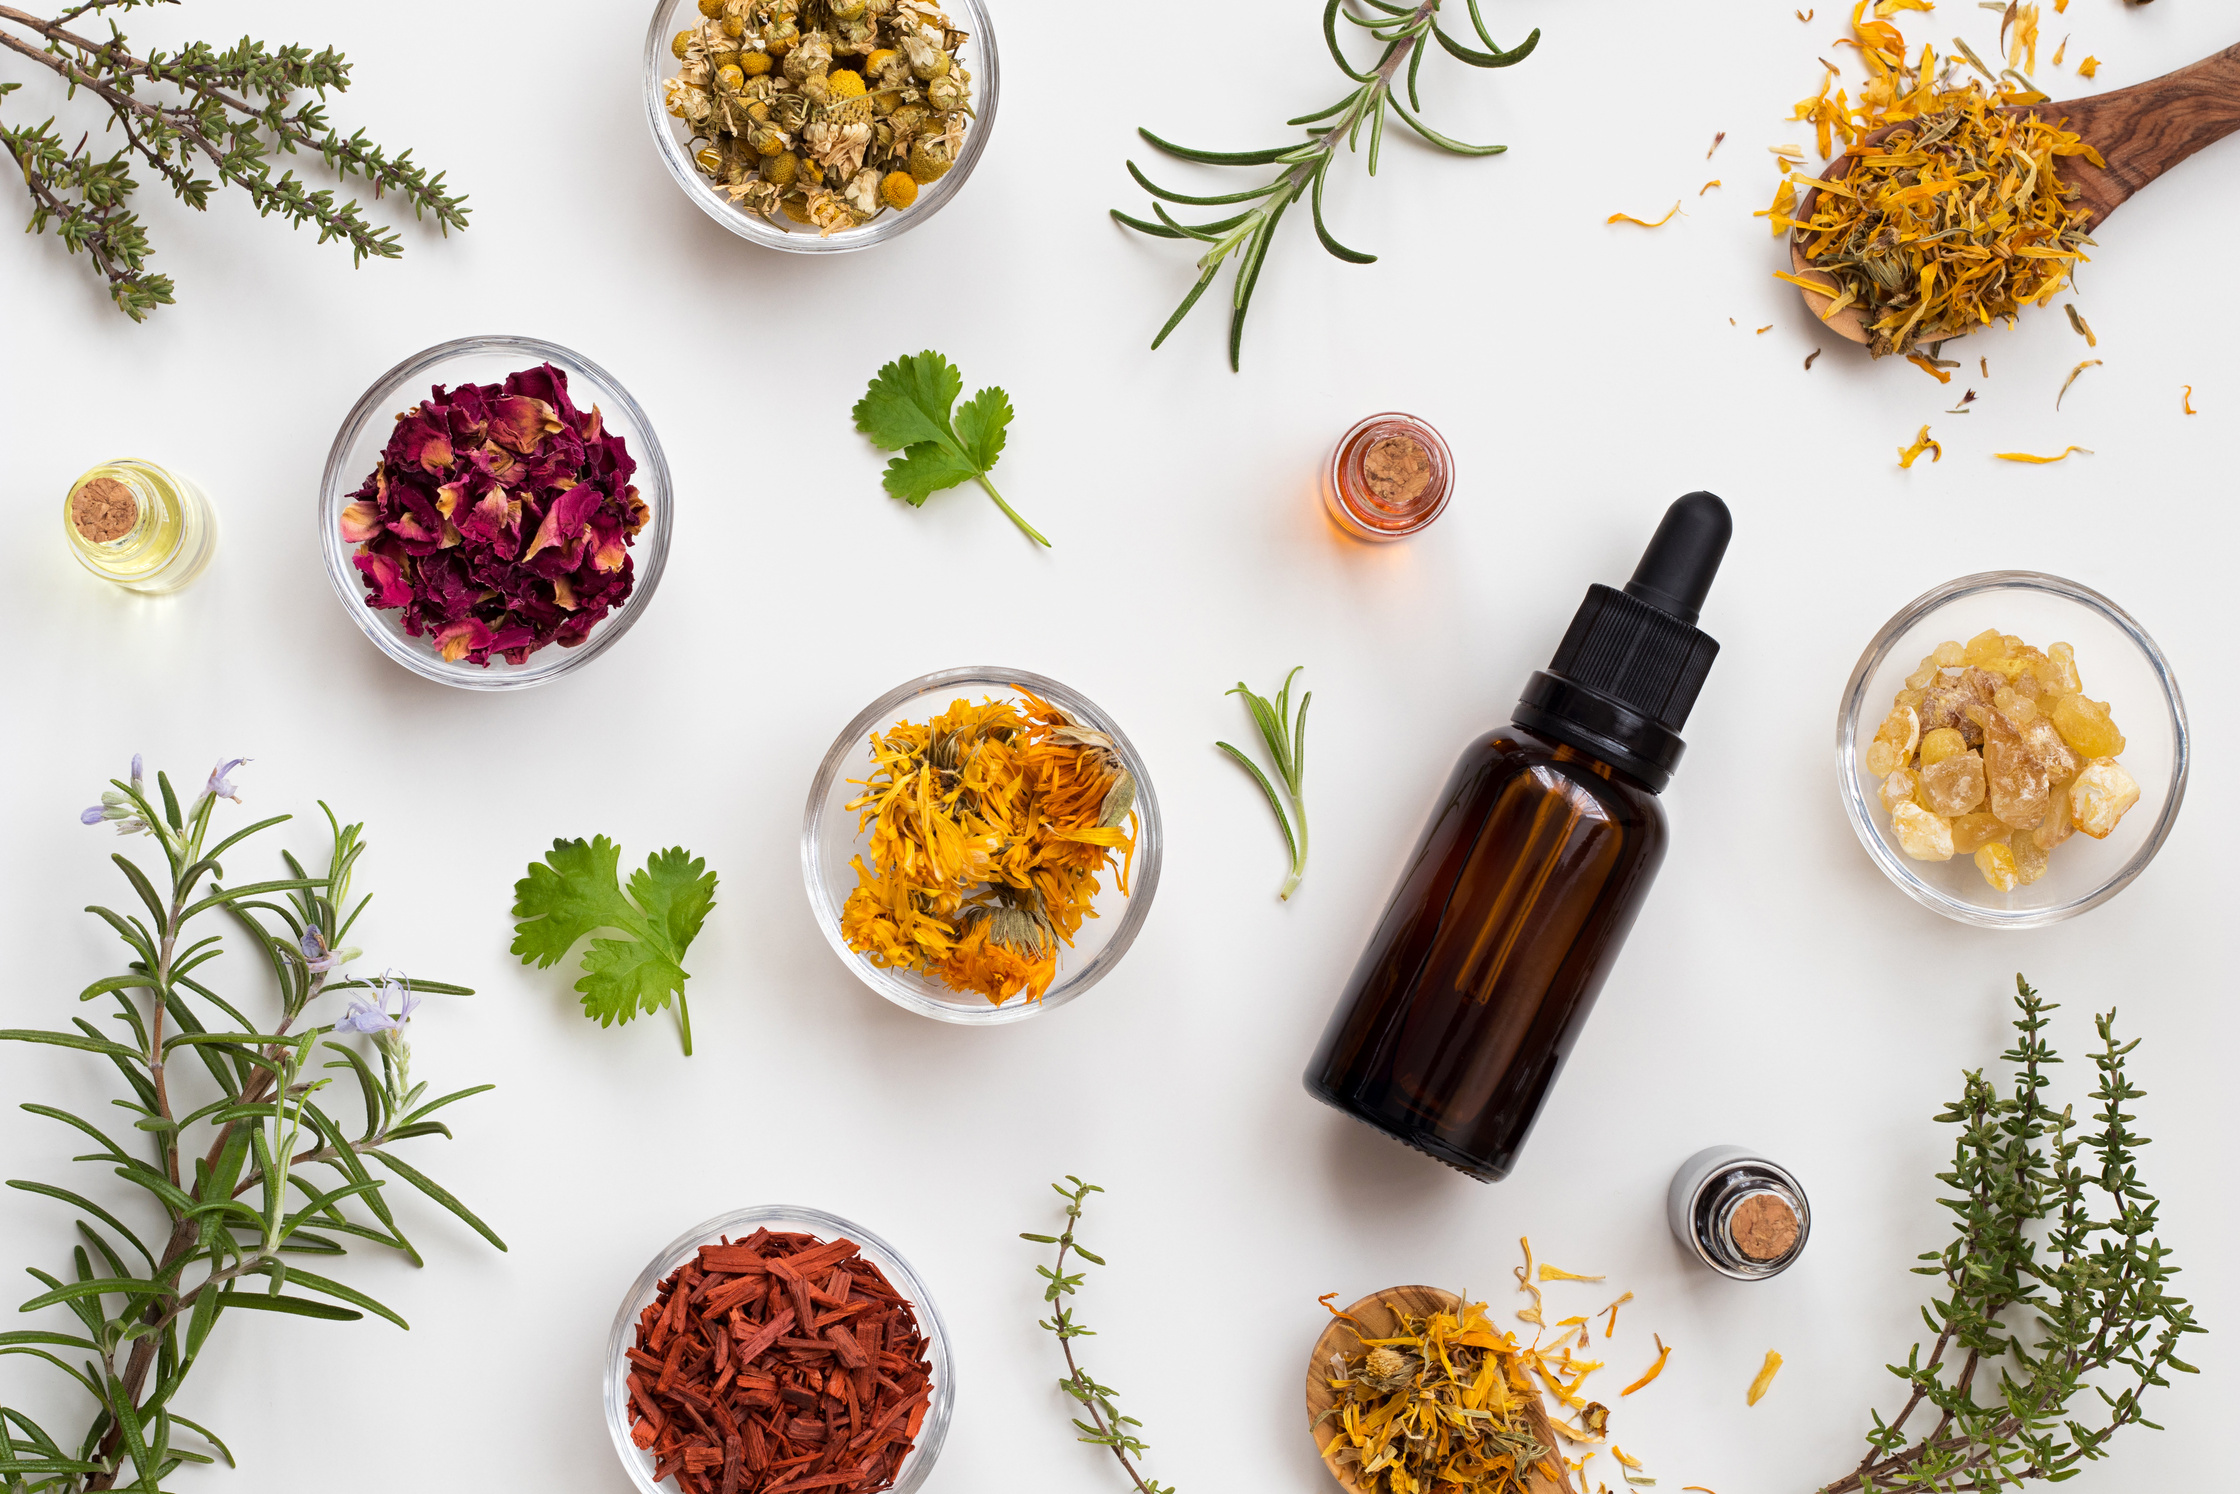 Selection of Essential Oils and Herbs 